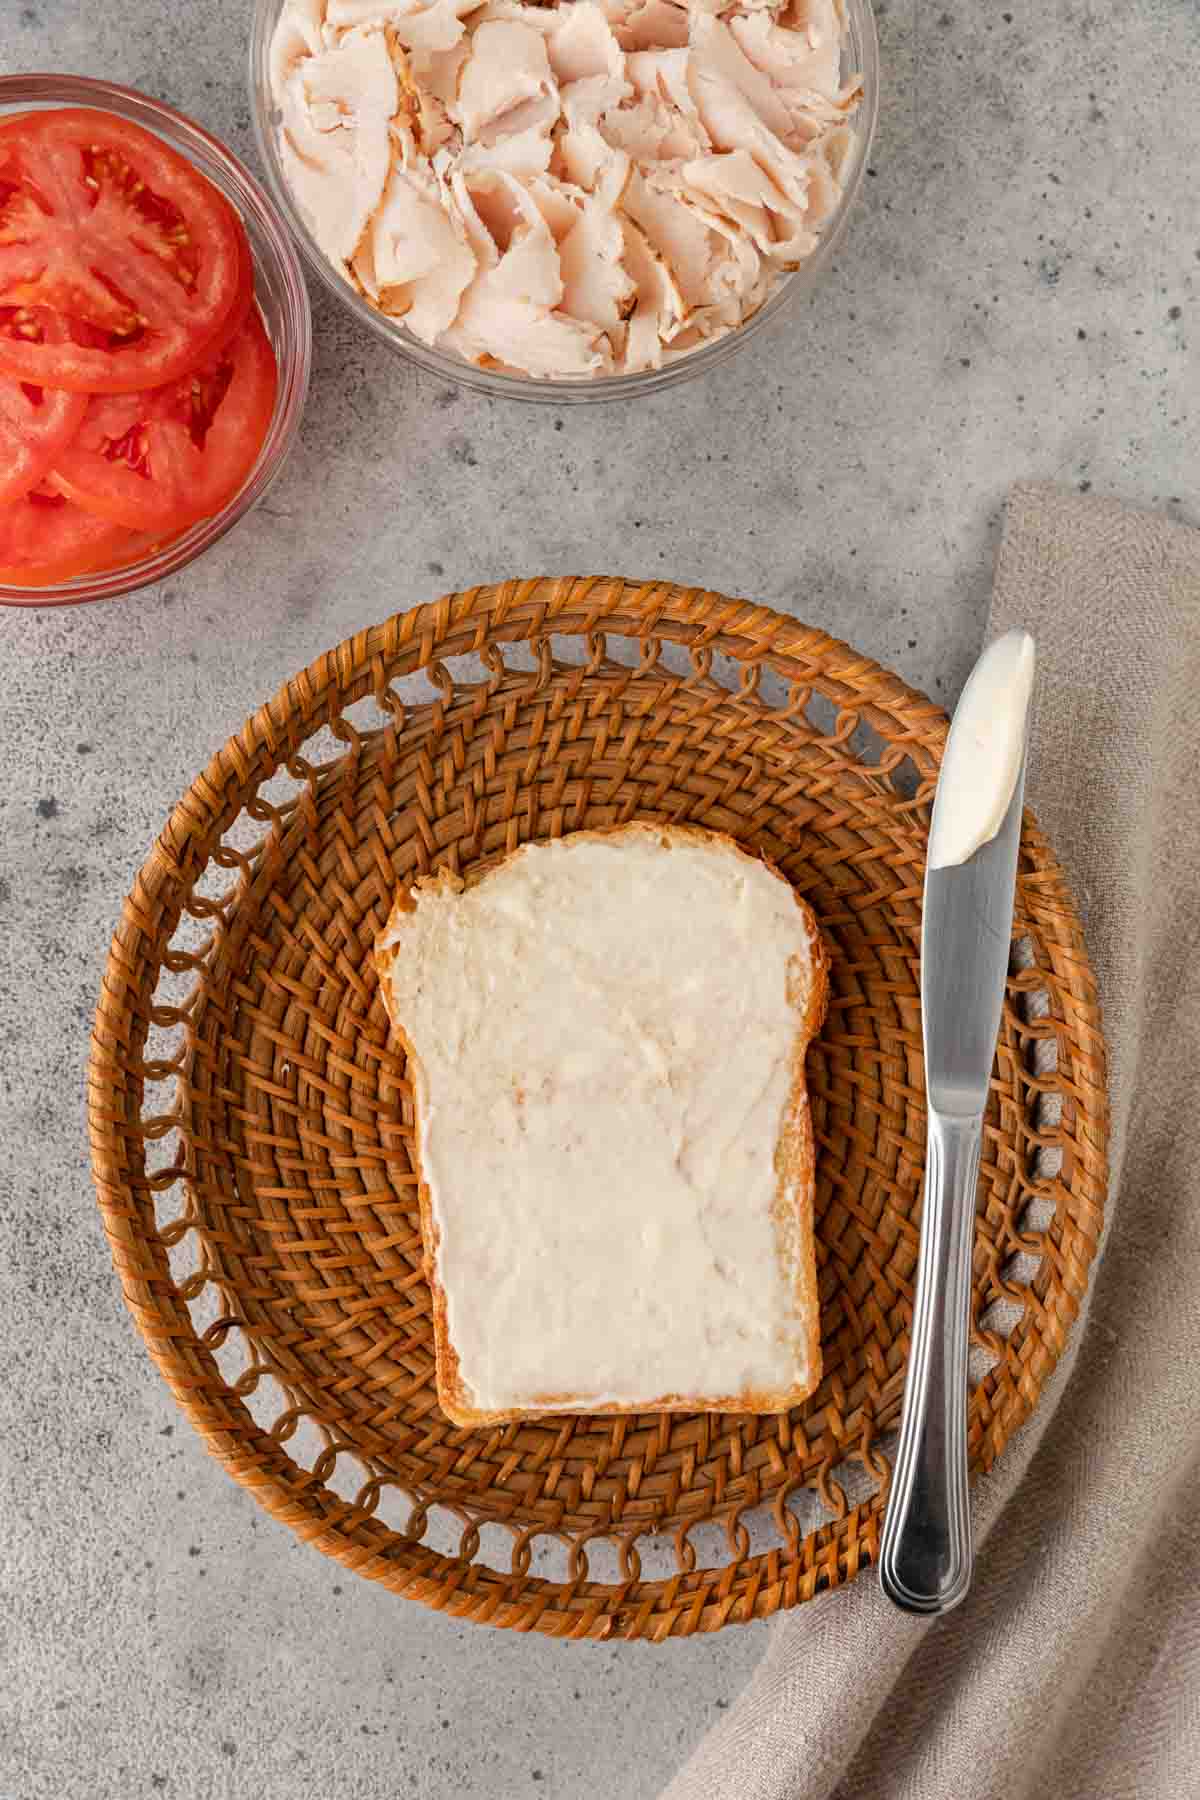 Turkey Sandwich slice of bread on plate with mayo speed on top with knife resting on plate. Turkey and tomatoes in separate prep bowls at top of frame.